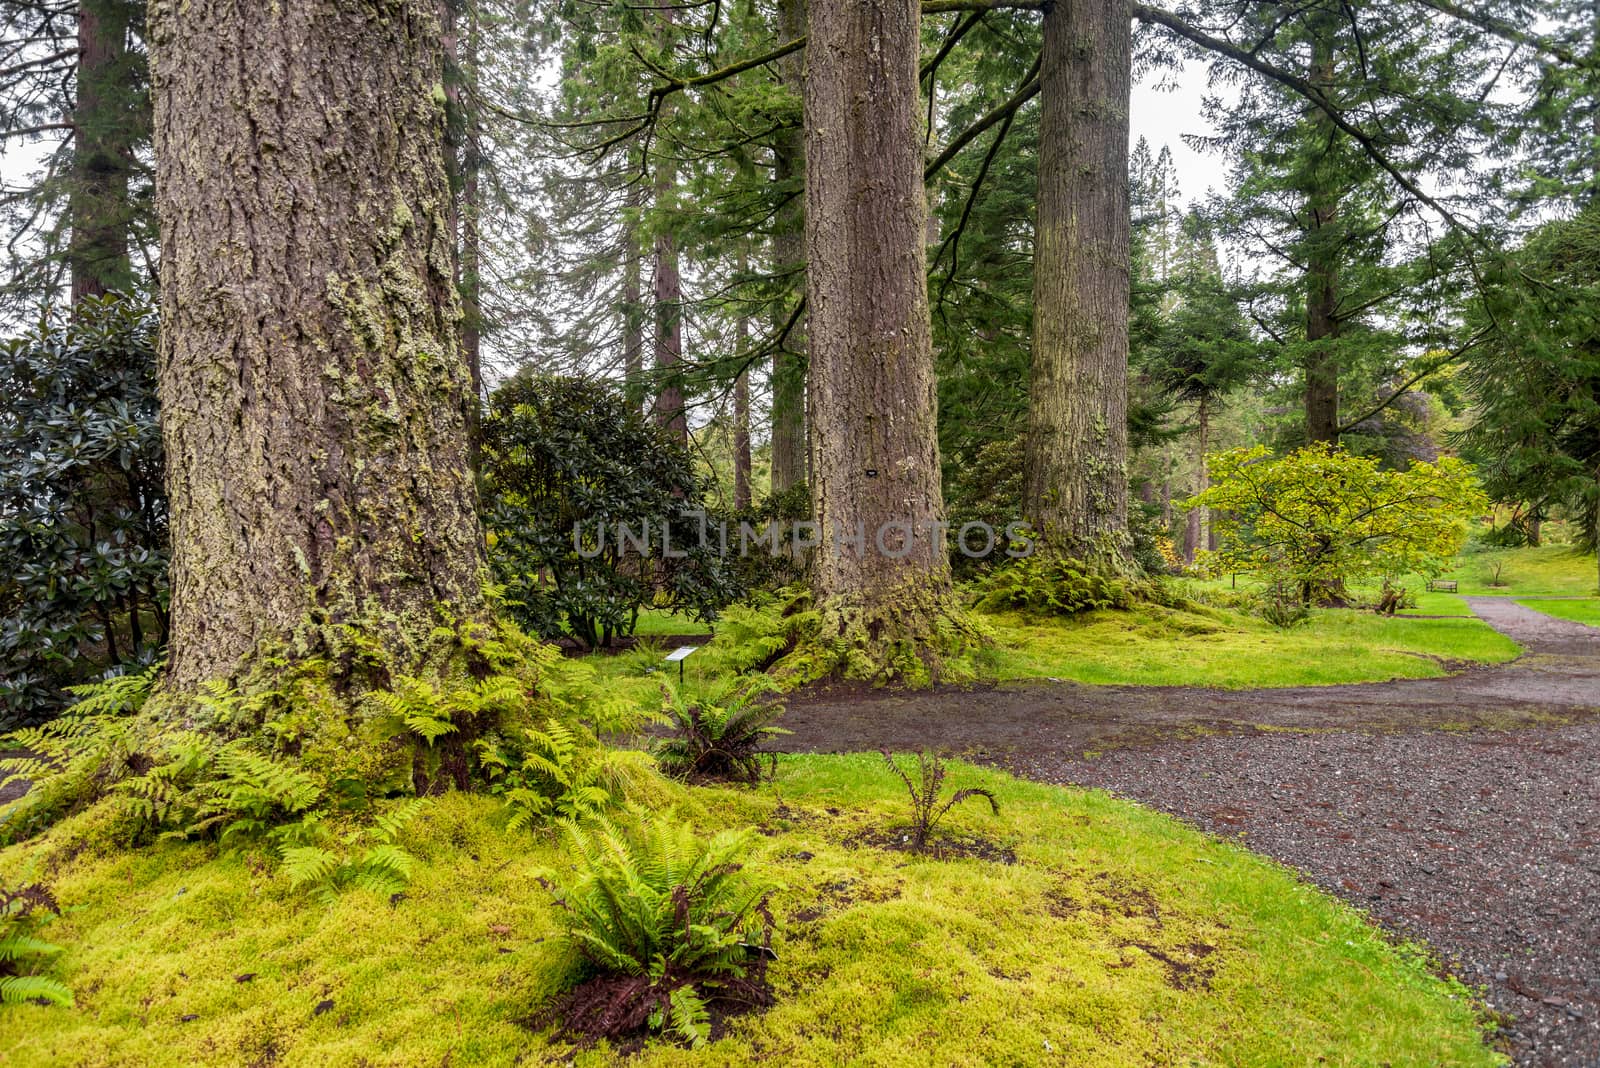 Redwood avenue at the entrance to Benmore Botanic Garden, Loch Lomond and the Trossachs National Park, Scotland